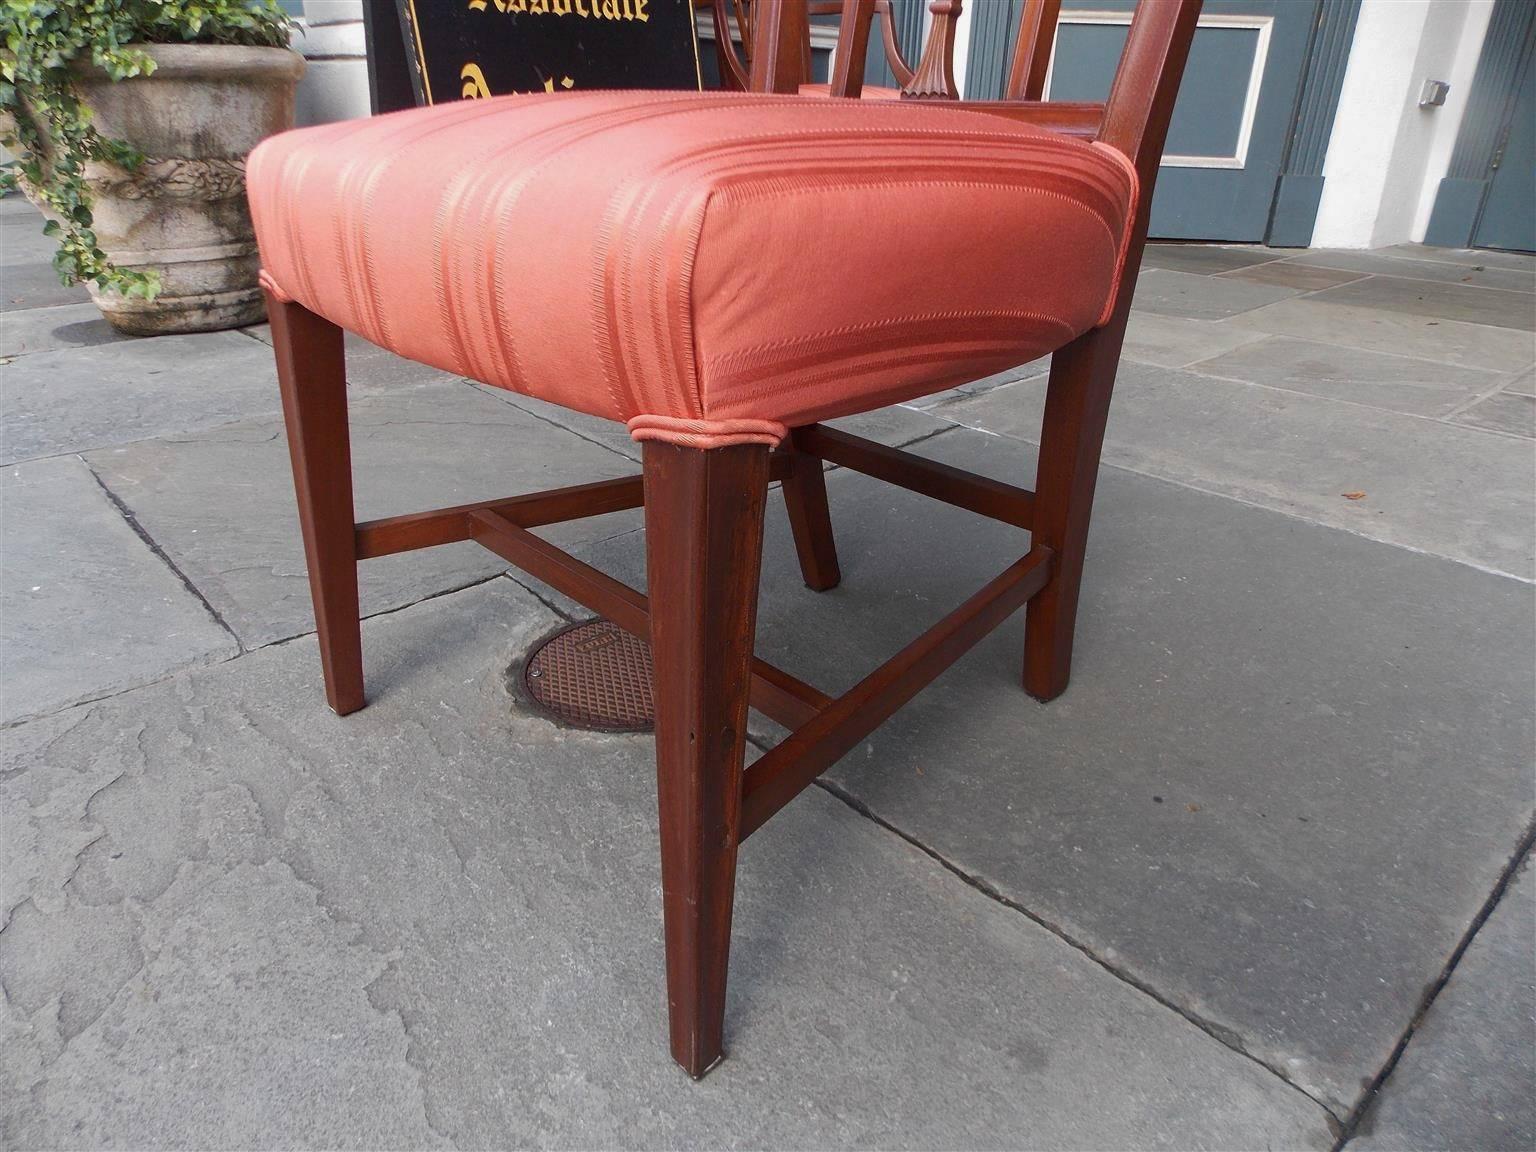 Late 18th Century American Charleston Mahogany Upholstered Side Chair, Circa 1790 For Sale